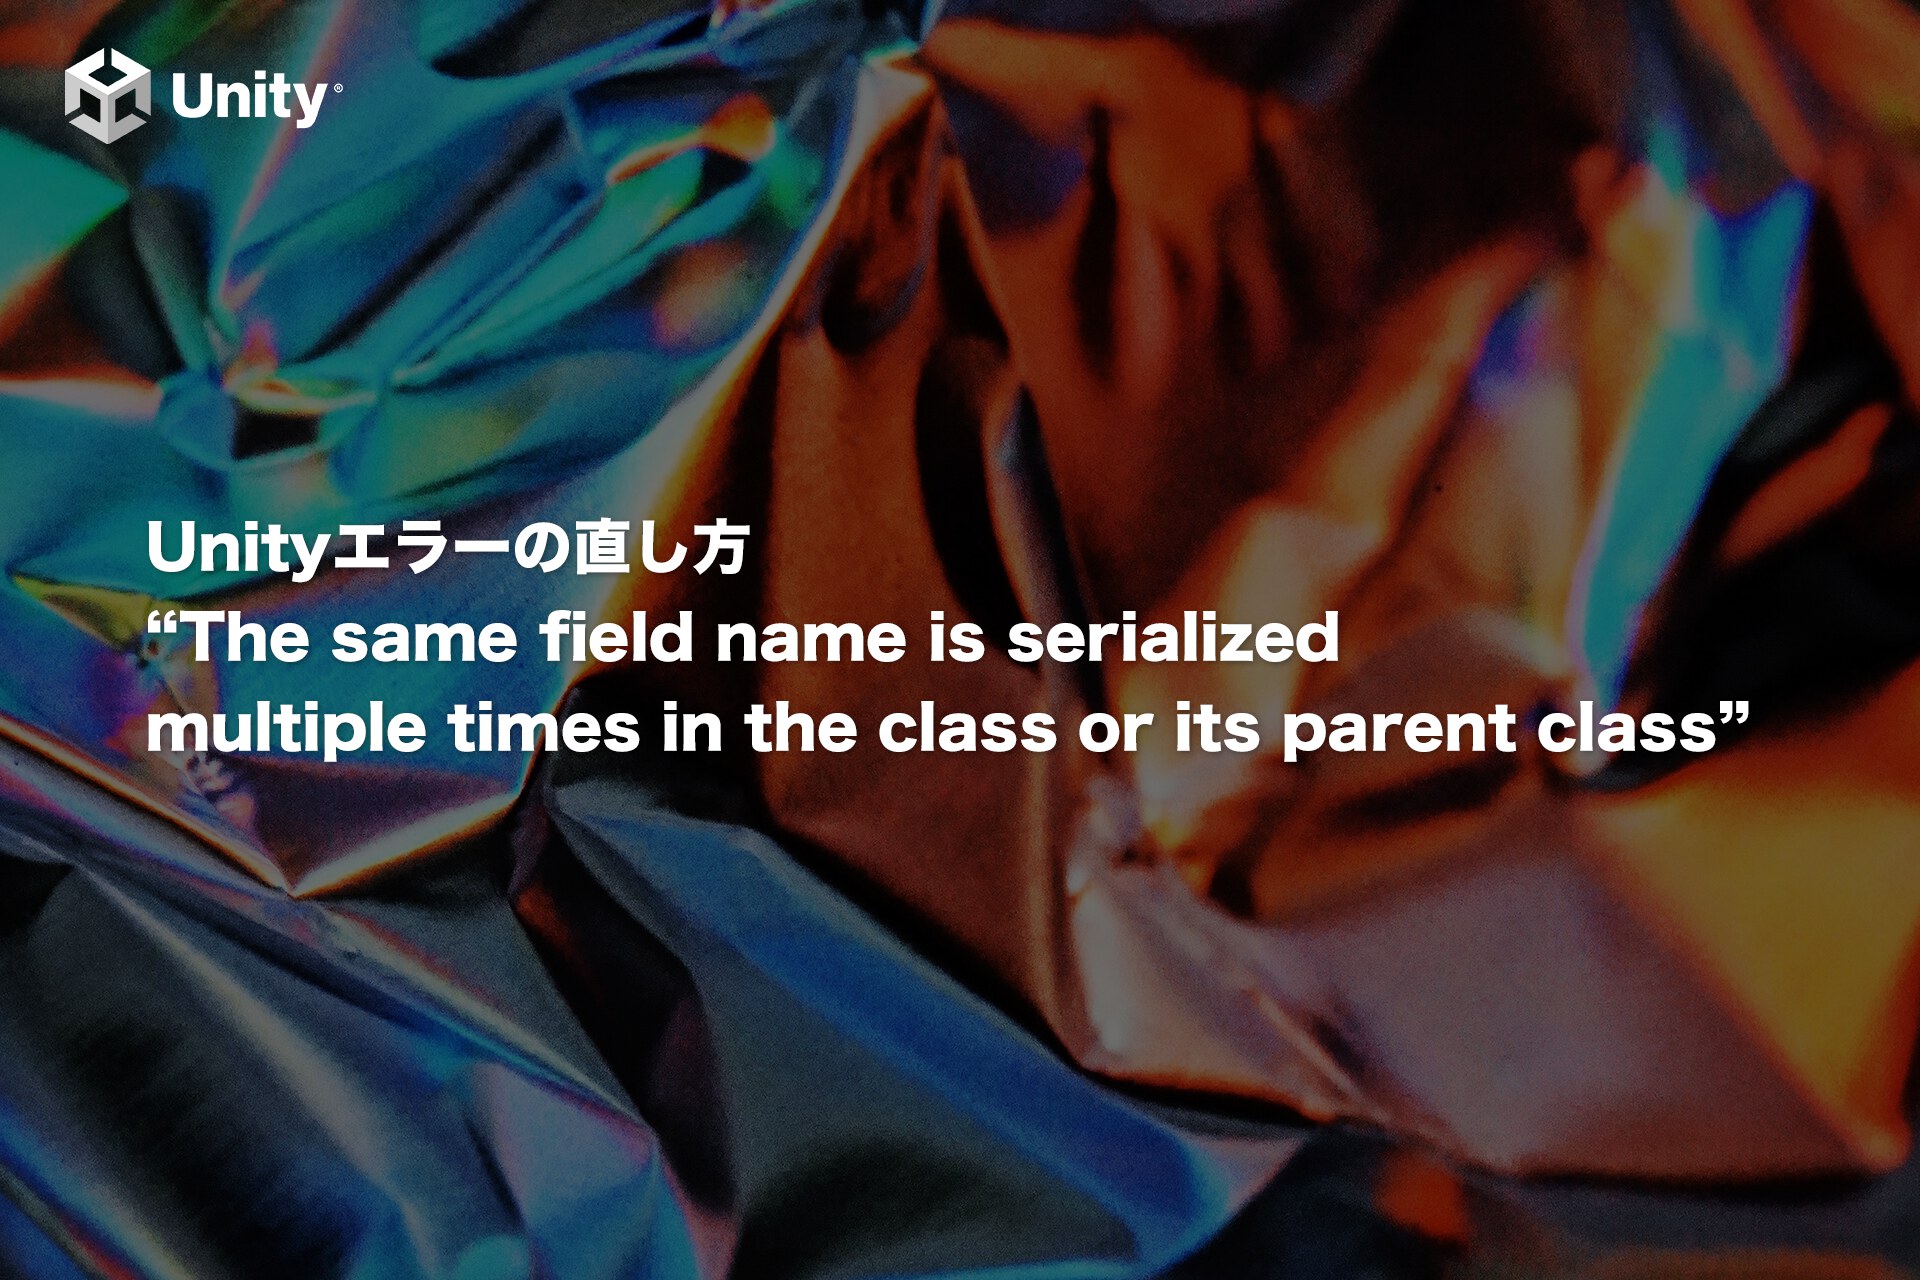 Unityエラー「The same field name is serialized multiple times in the class or its parent class」の対処